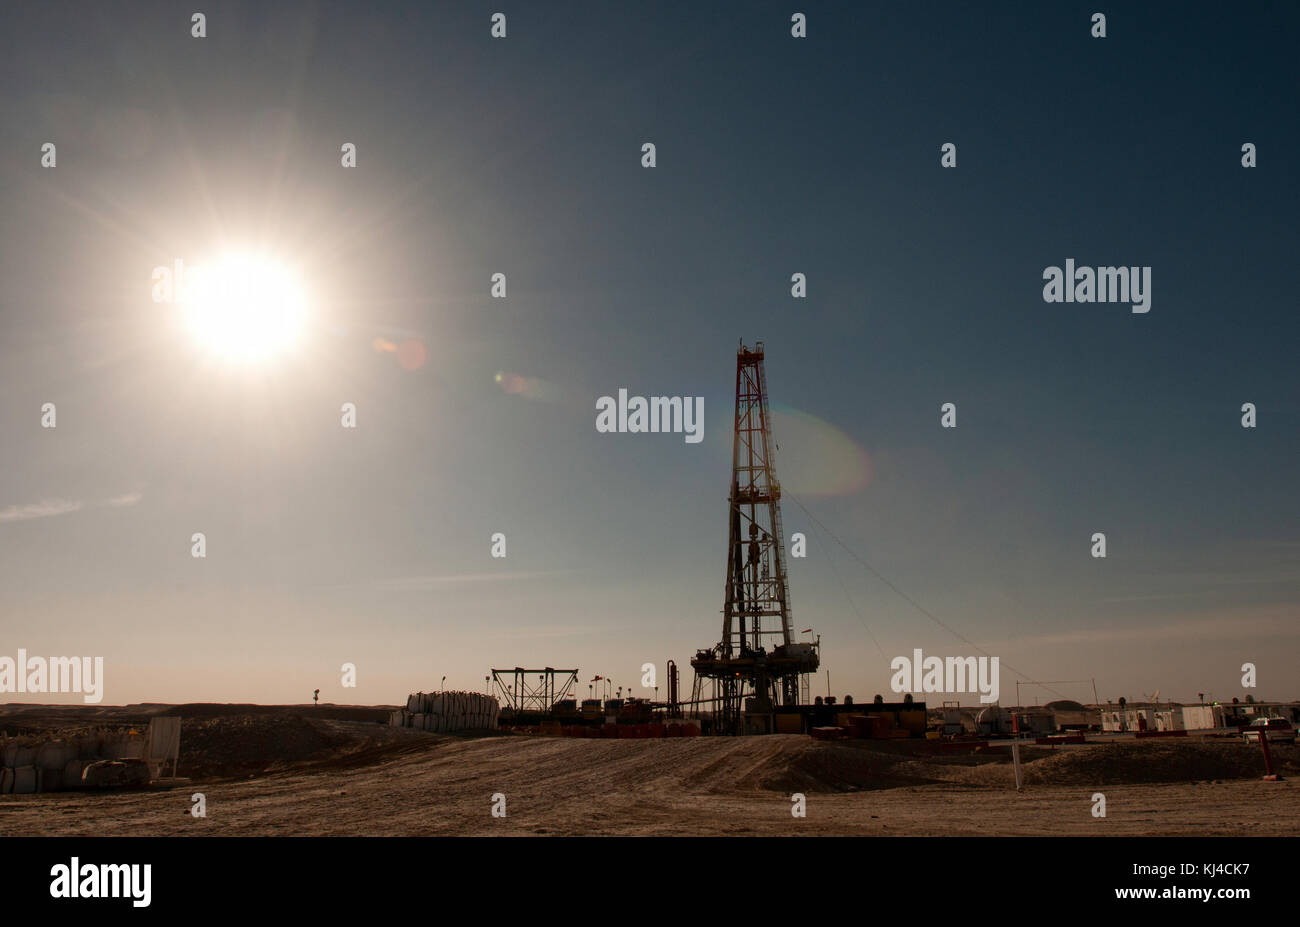 A Rig in the middle of Arabian desert Stock Photo